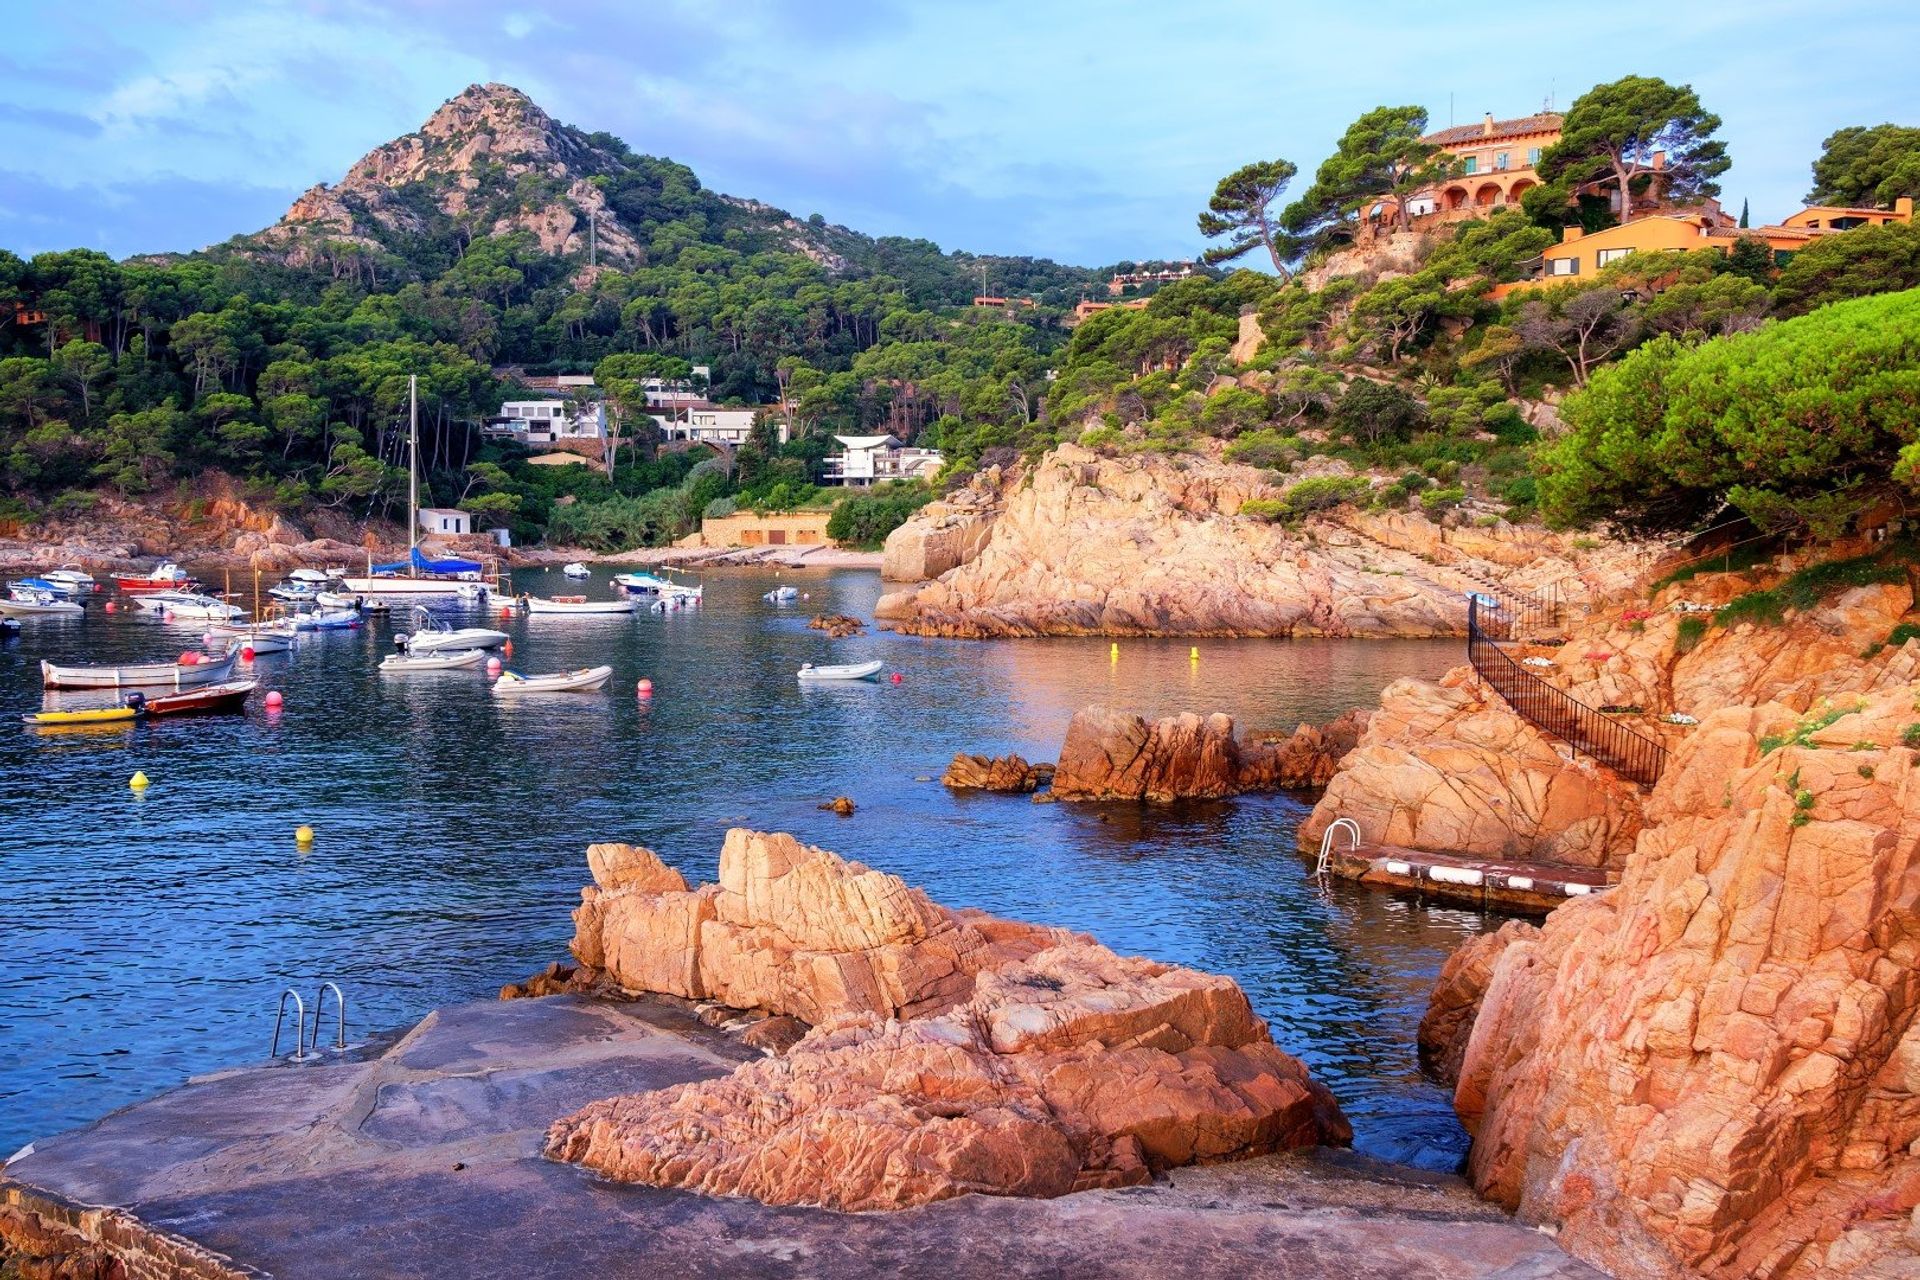 Discover a quieter side to the Costa Brava, with a traditional way of life